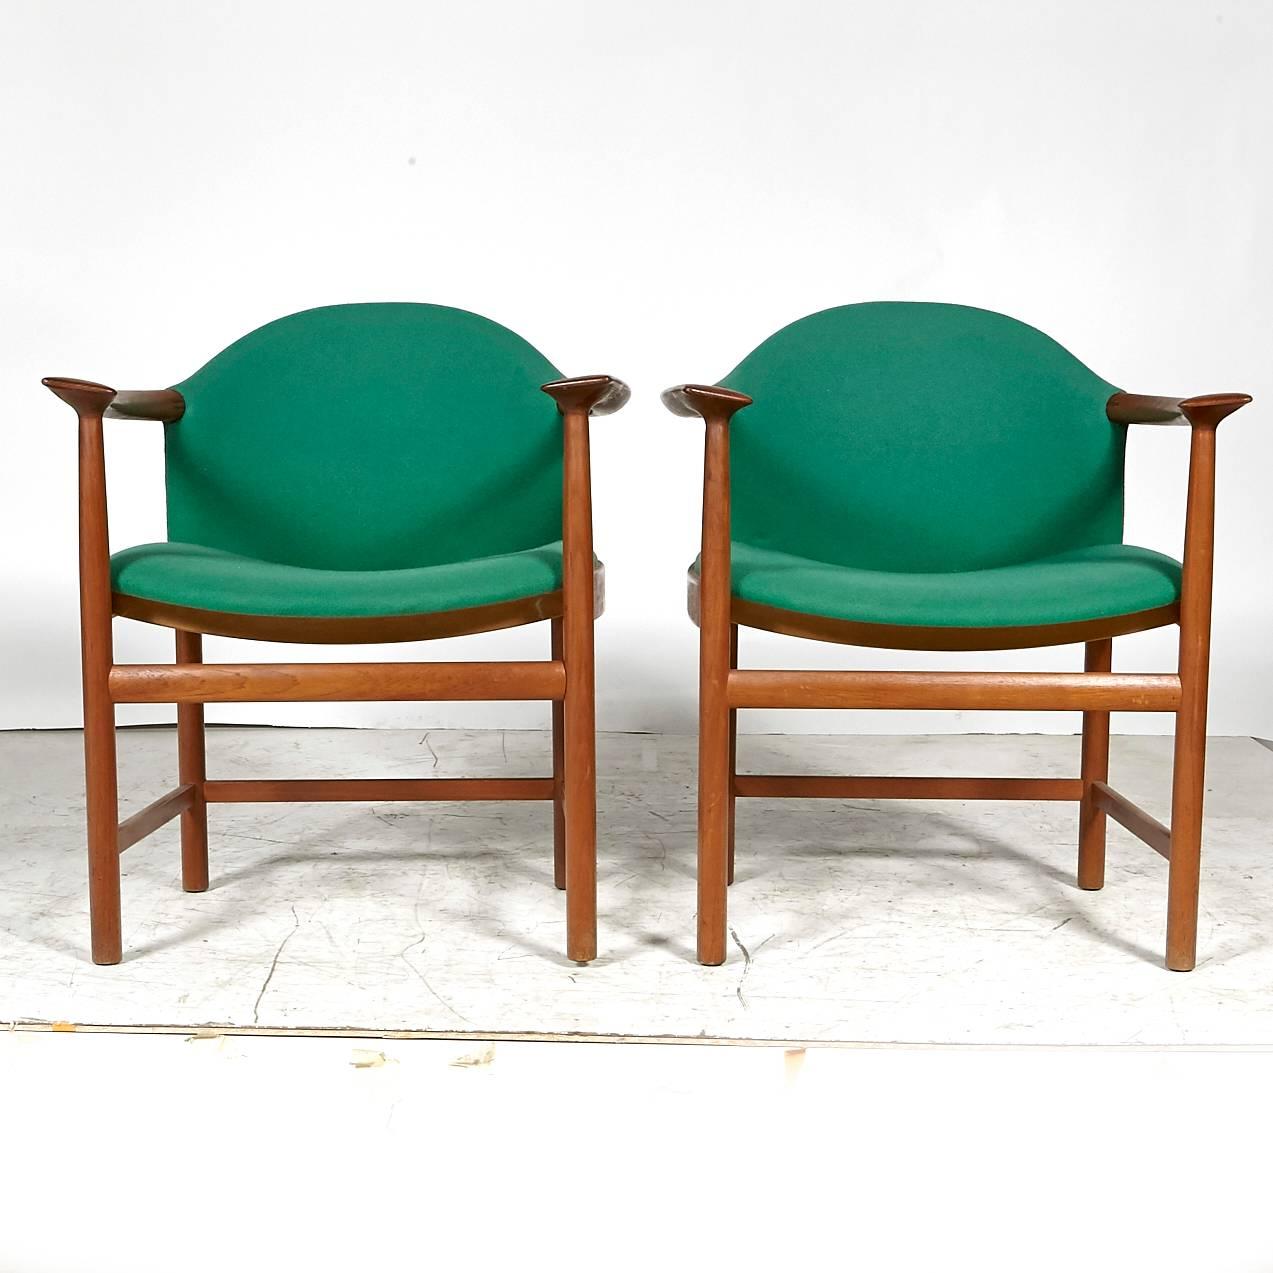 Danish teak set of six sculpted armchairs with original fabric. Seat 17in.H. Arm, 27in.H. Unmarked.